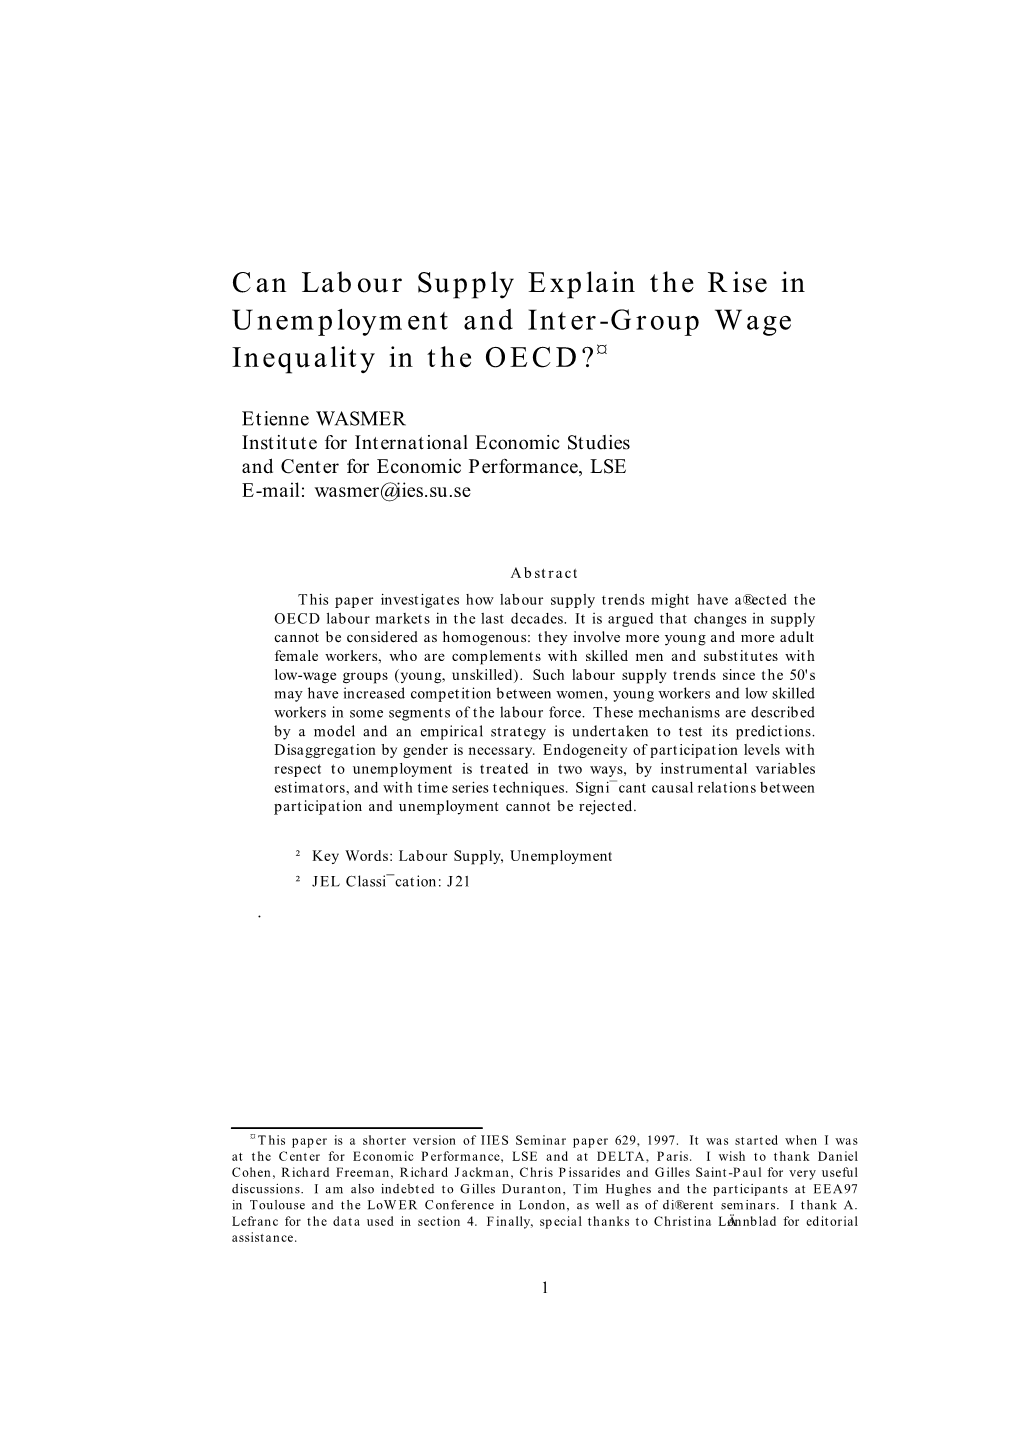 Can Labour Supply Explain the Rise in Unemployment and Inter-Group Wage Inequality in the OECD?¤